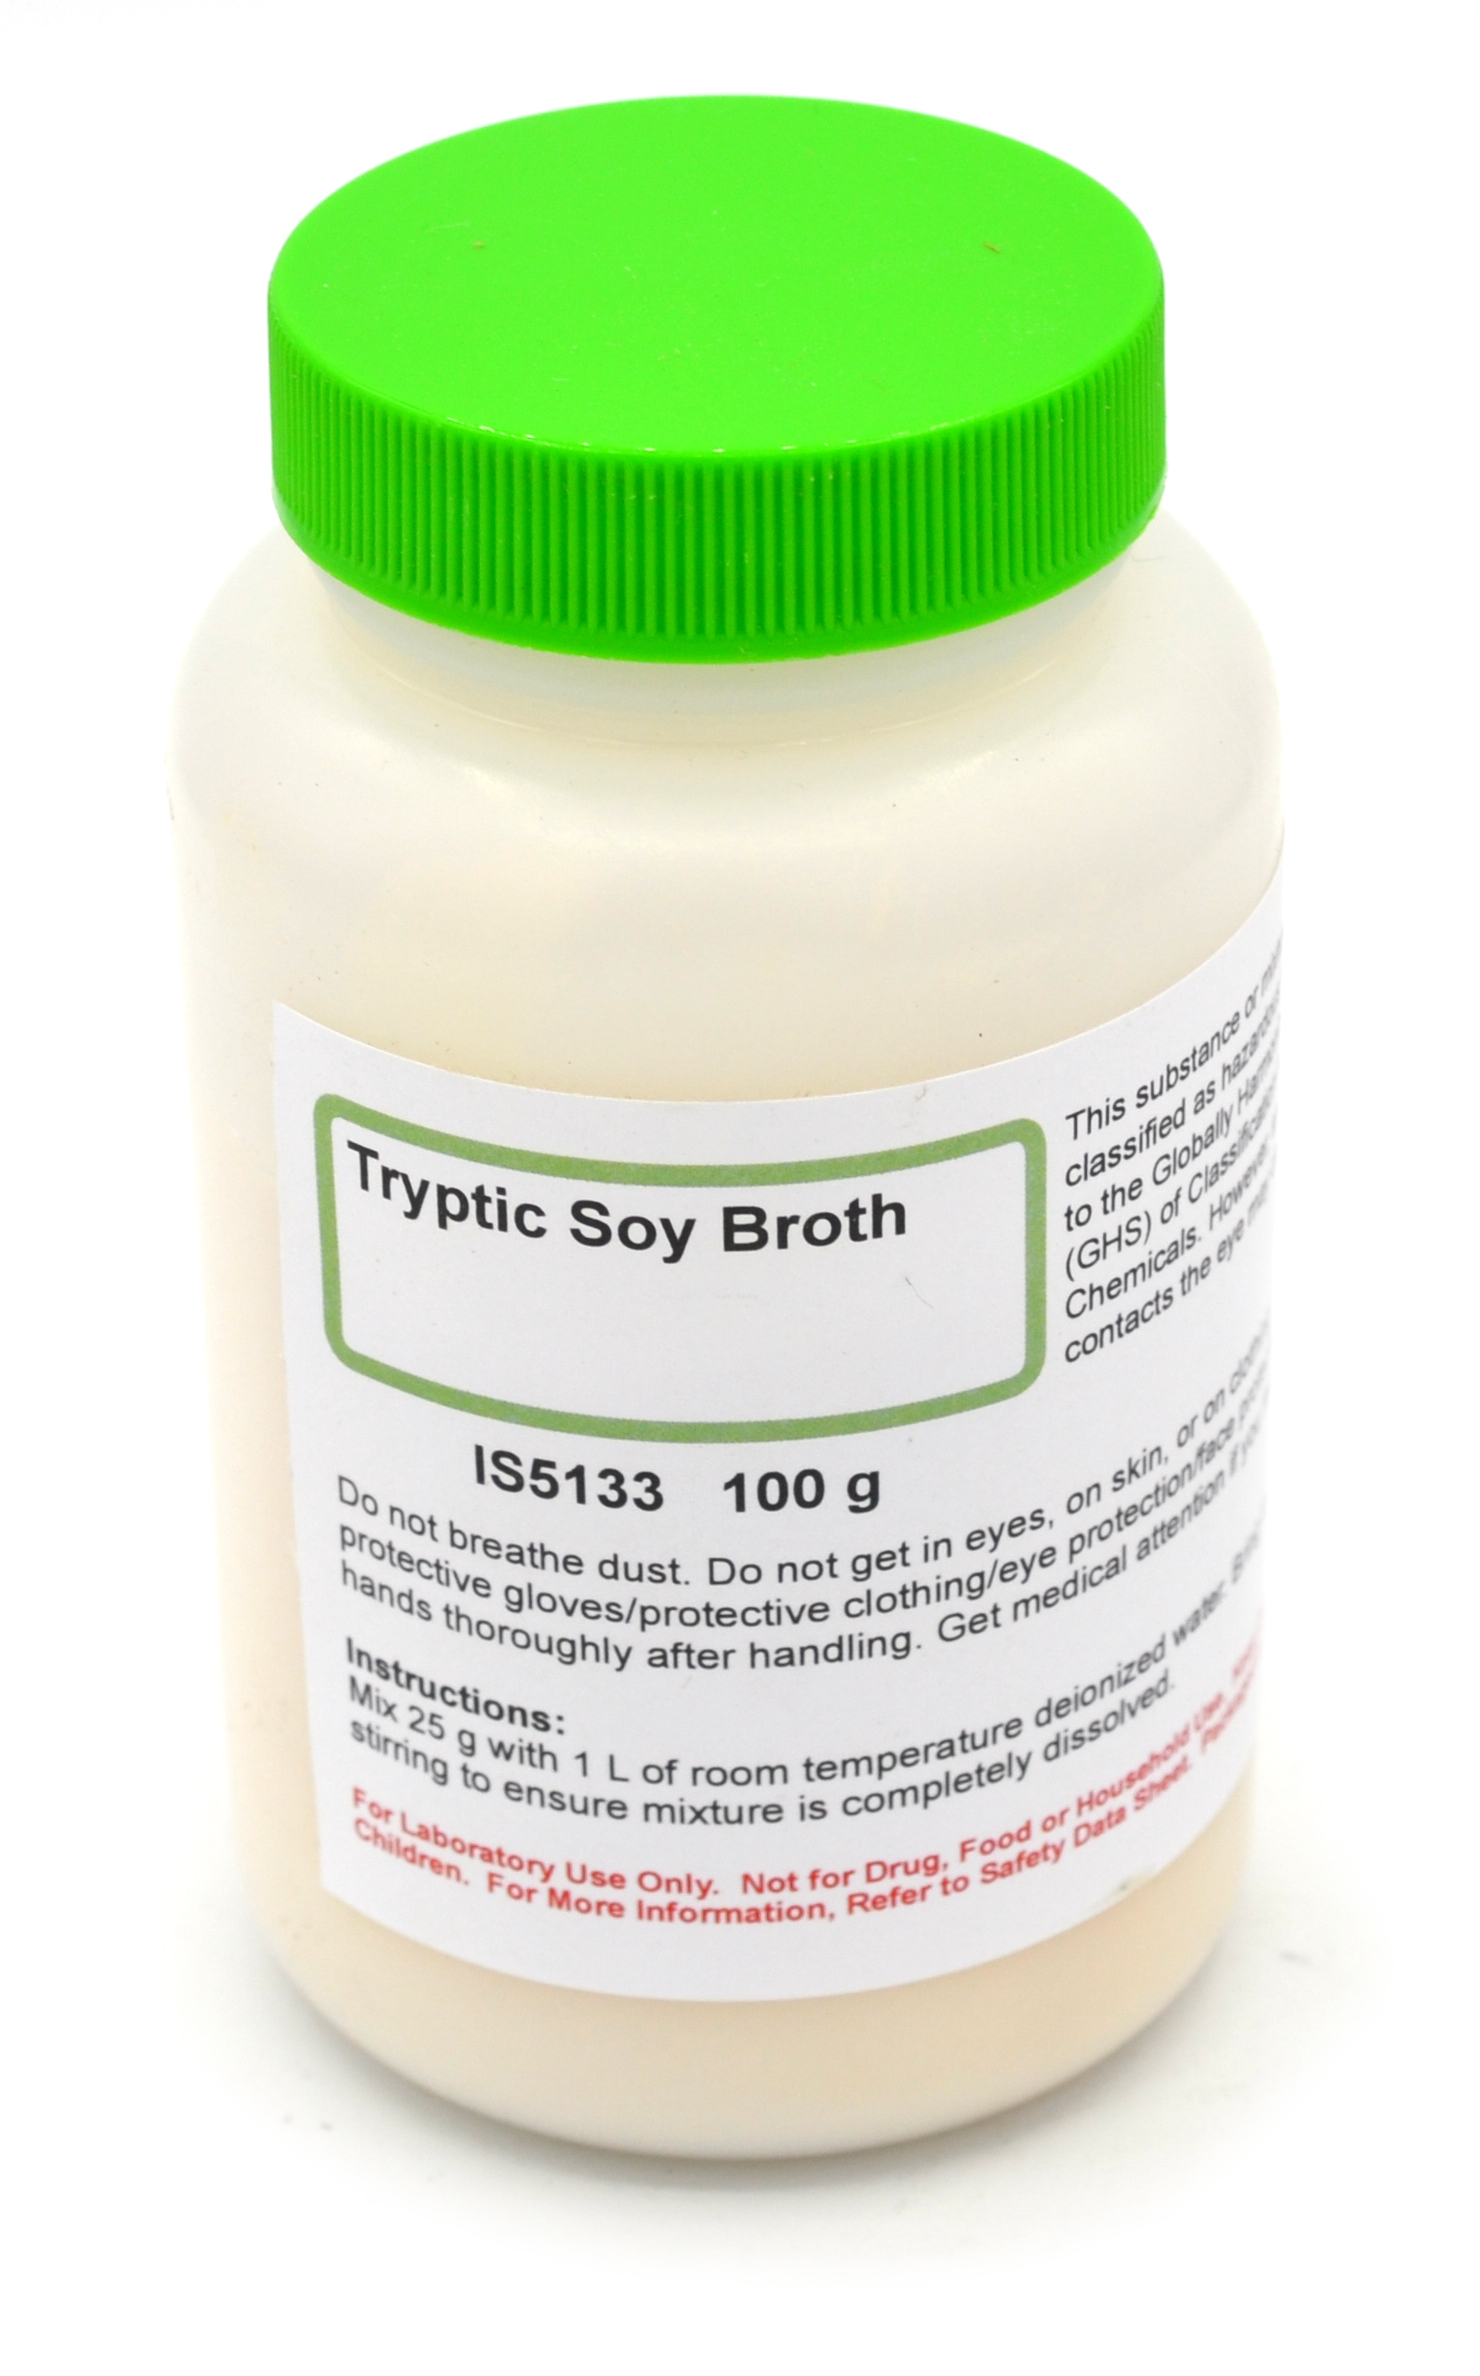 bbl trypticase soy broth